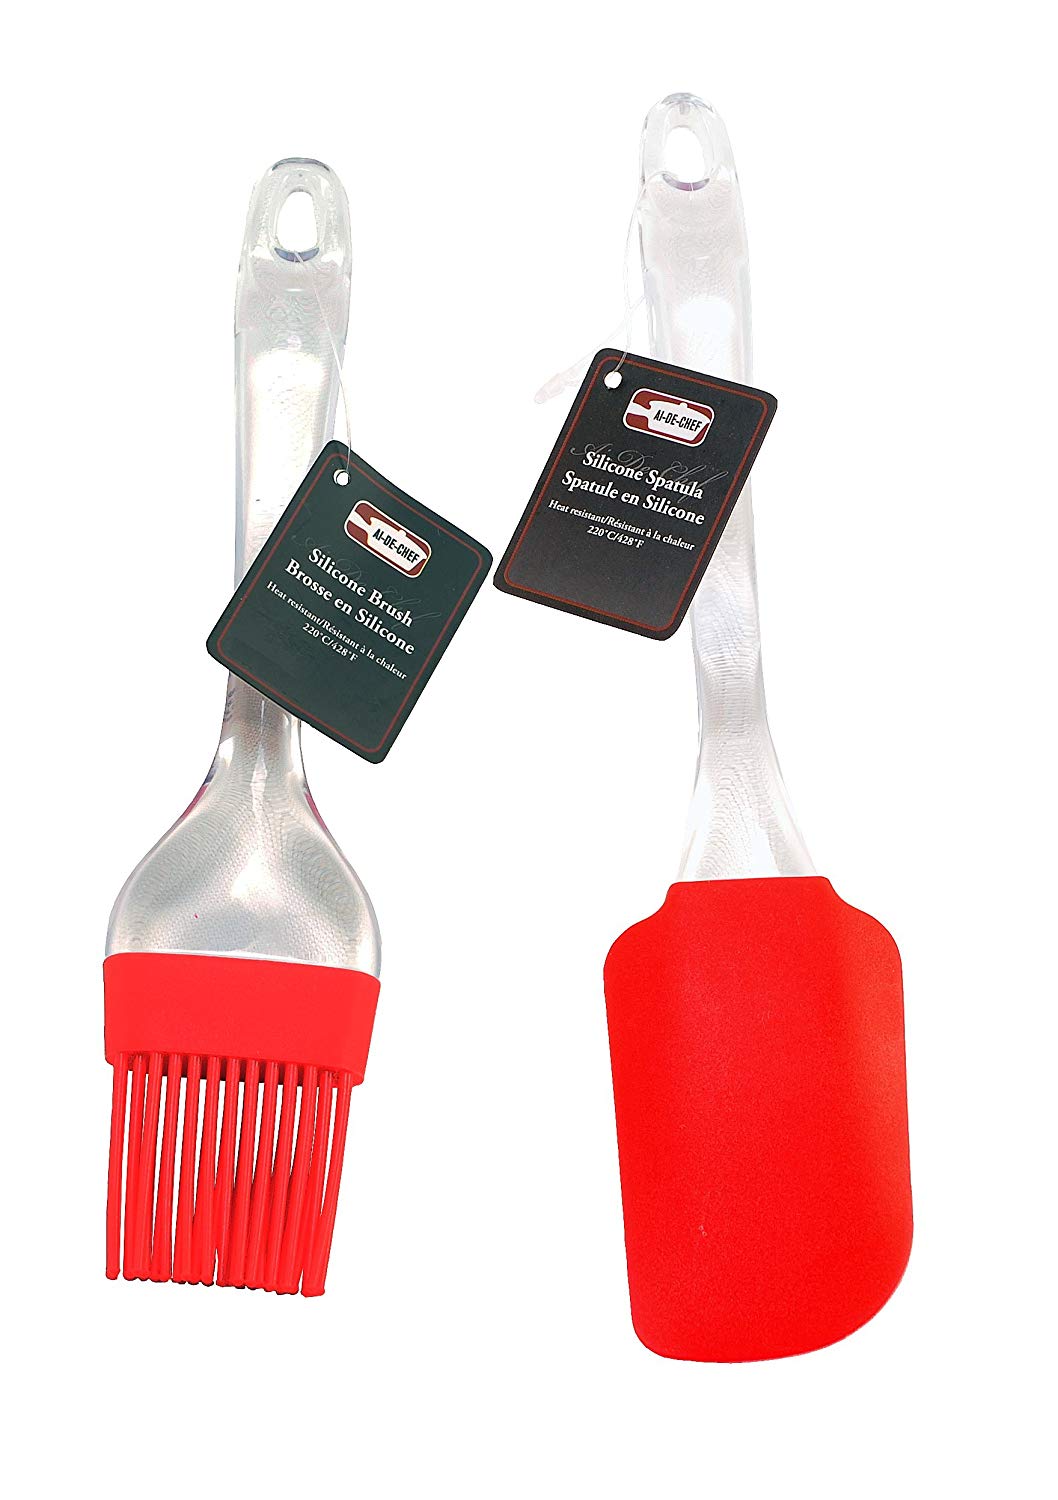 Silicone Spatula and Basting Brush Set - Non-Stick Flexible Silicone Spatula - Silicone Basting Brush, Pastry Brush, BBQ Brush - Dishwasher Safe, Heat Resistant up to 428ºF By Ai-De-Chef (2-Pack, Red)